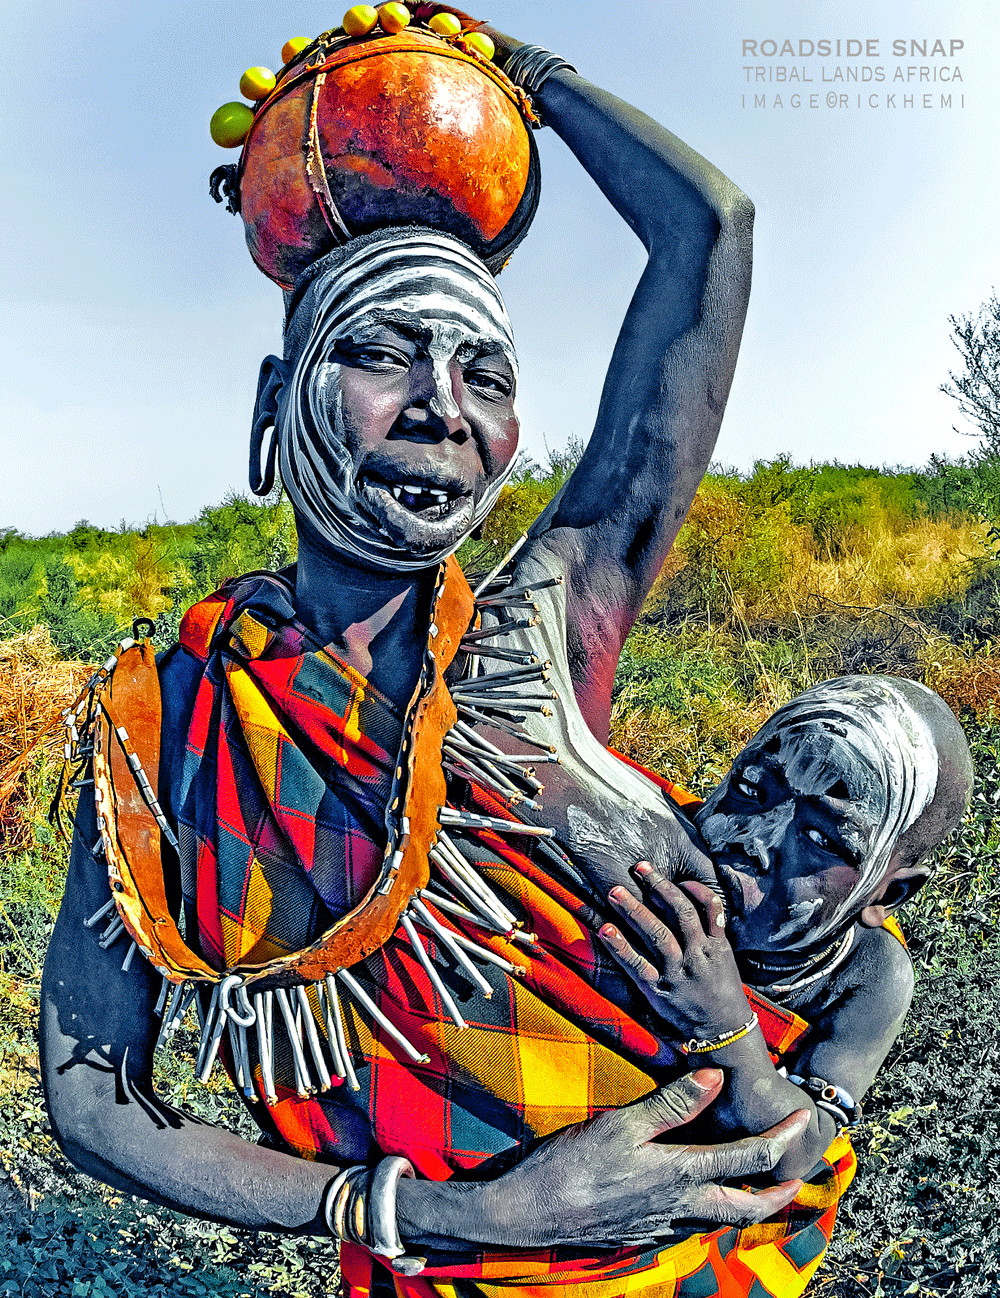 solo overland travel Africa, tribal roadside snap Africa, image by Rick Hemi